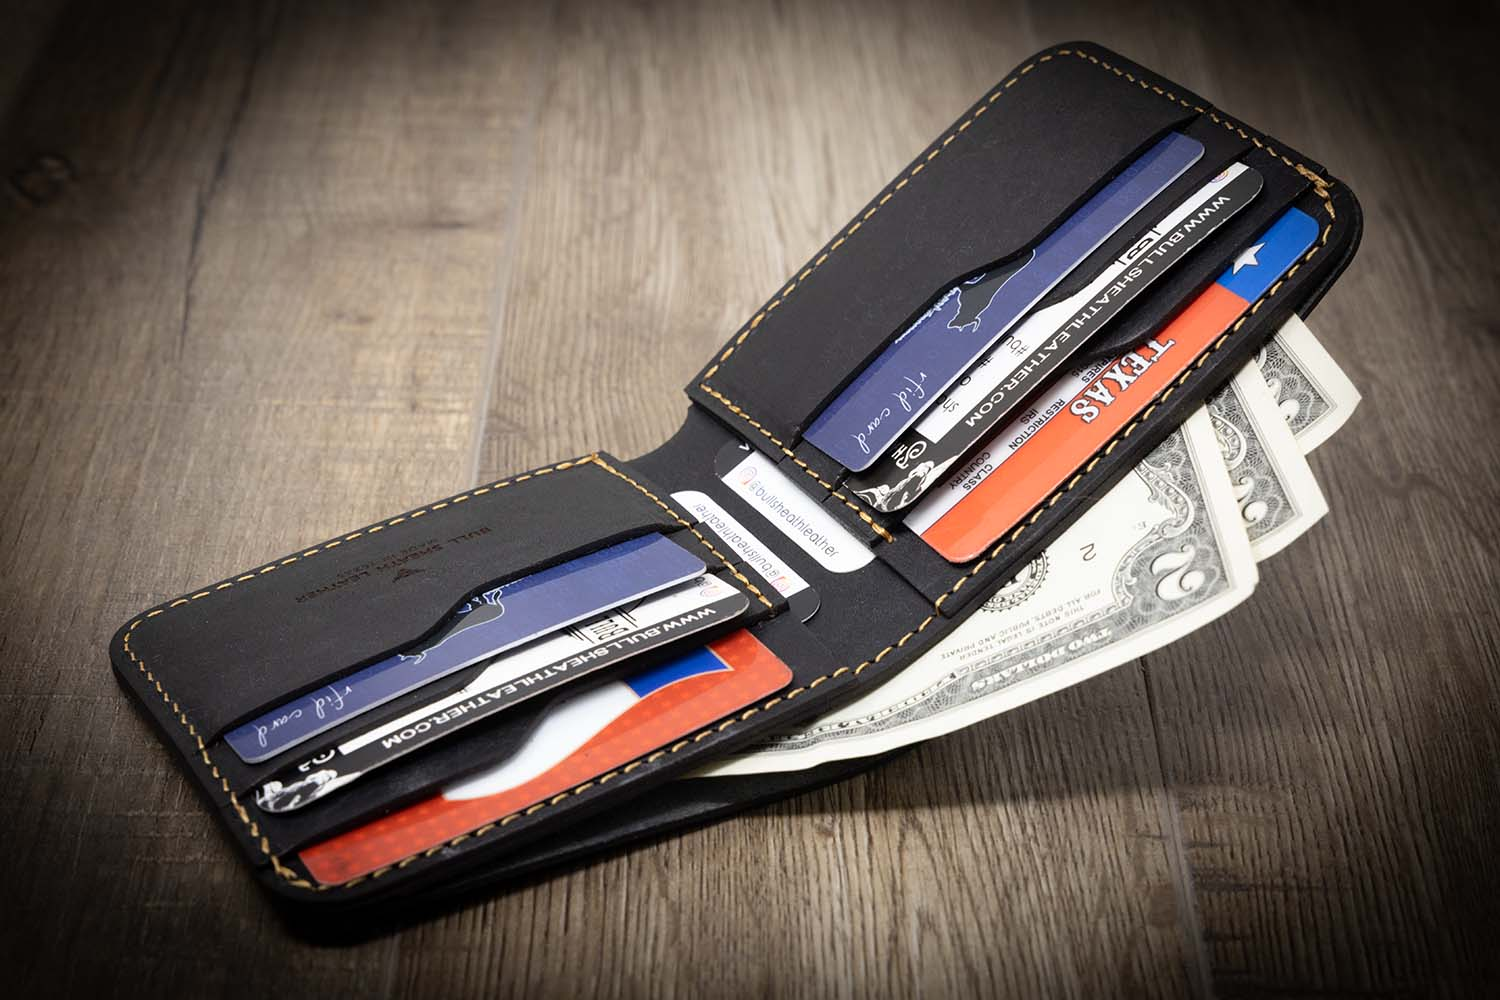 A wallet with enough space to store cards, cash and other items